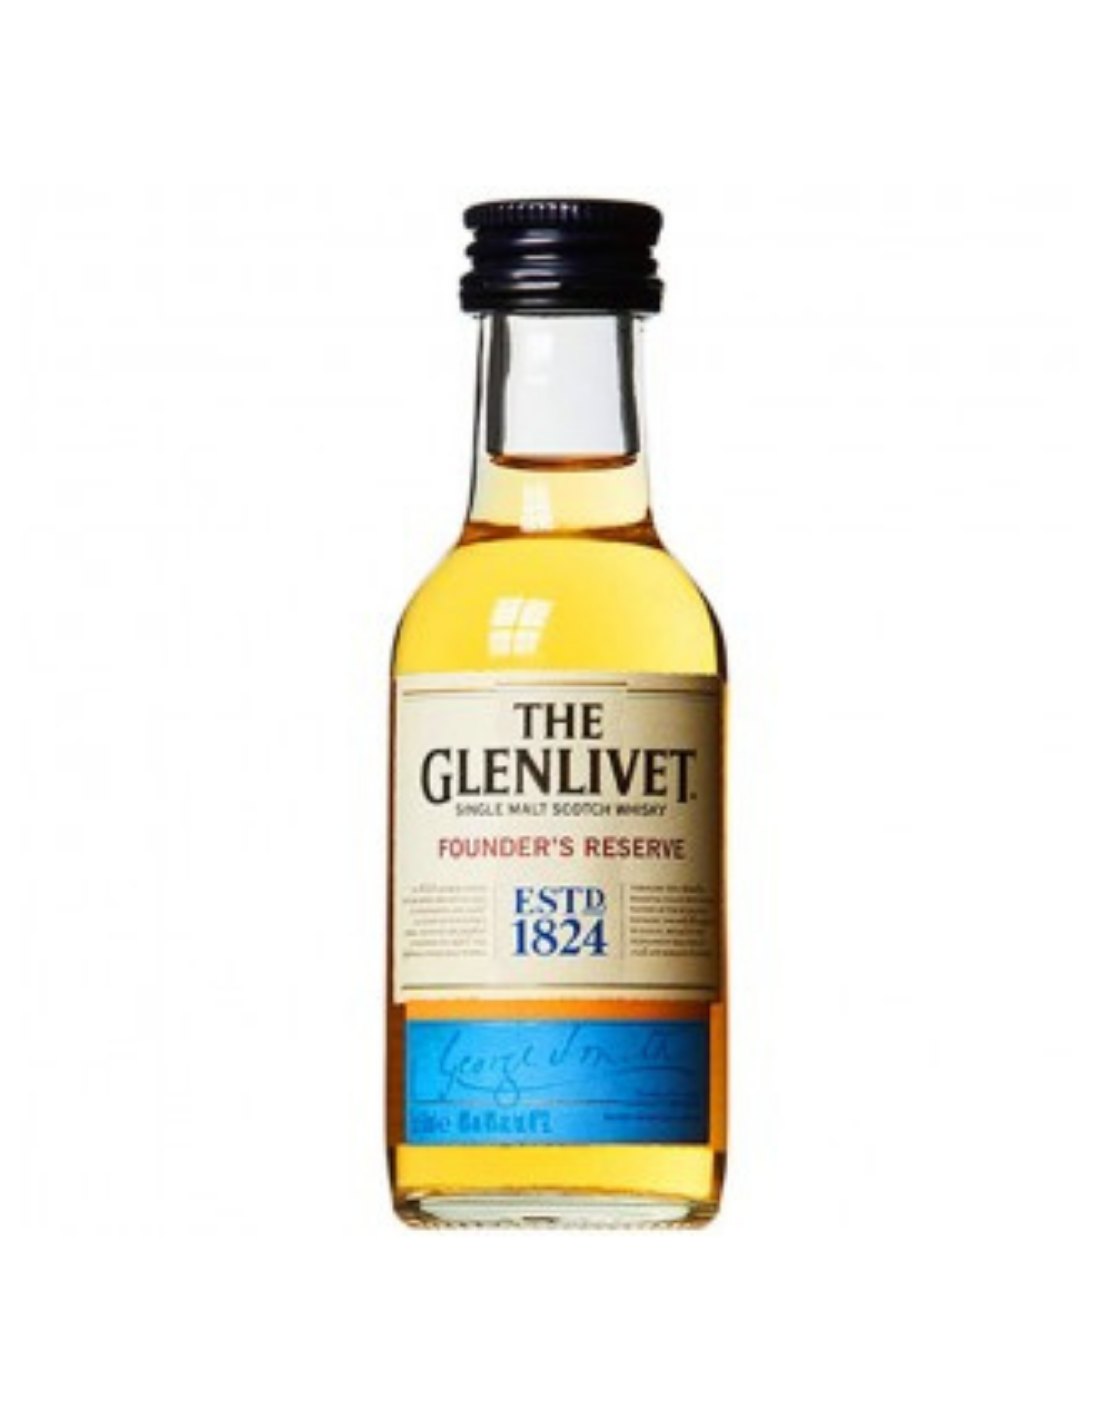 Whisky The Glenlivet Founder’s Reserve, 0.05L, 40% alc., Scotia alcooldiscount.ro